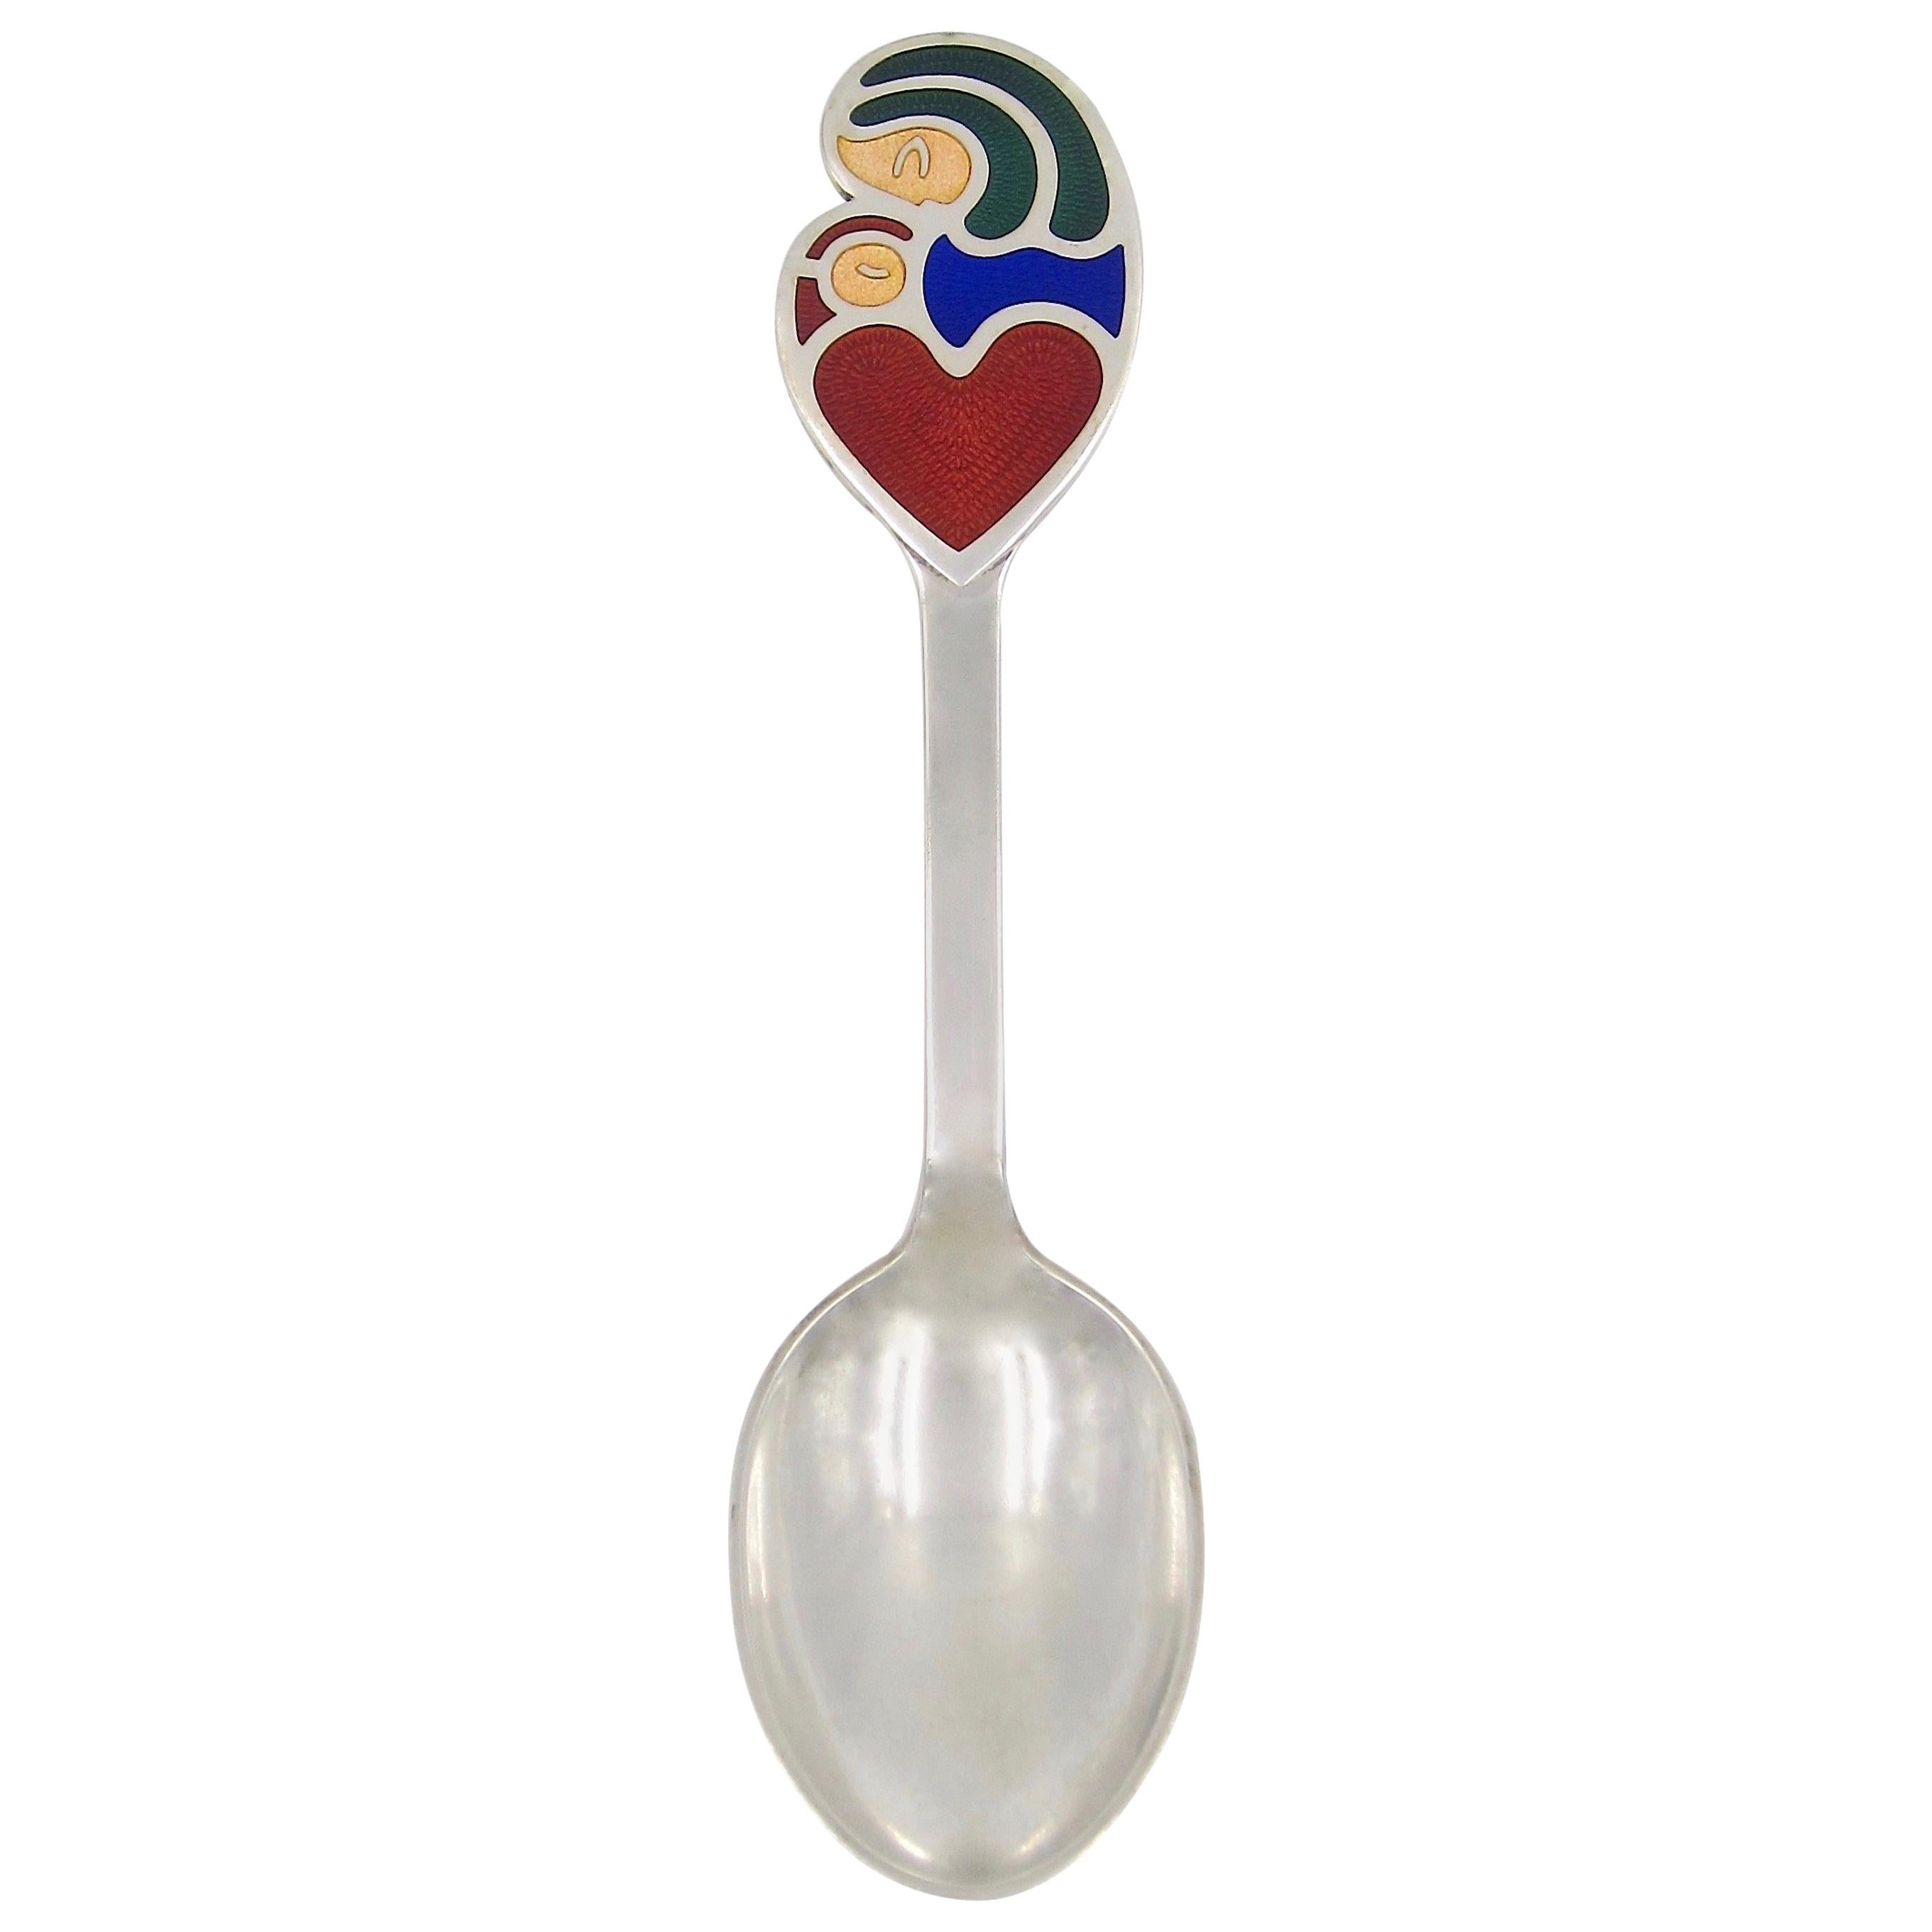 1968 Anton Michelsen Silver and Enamel Christmas Spoon by Henry Heerup